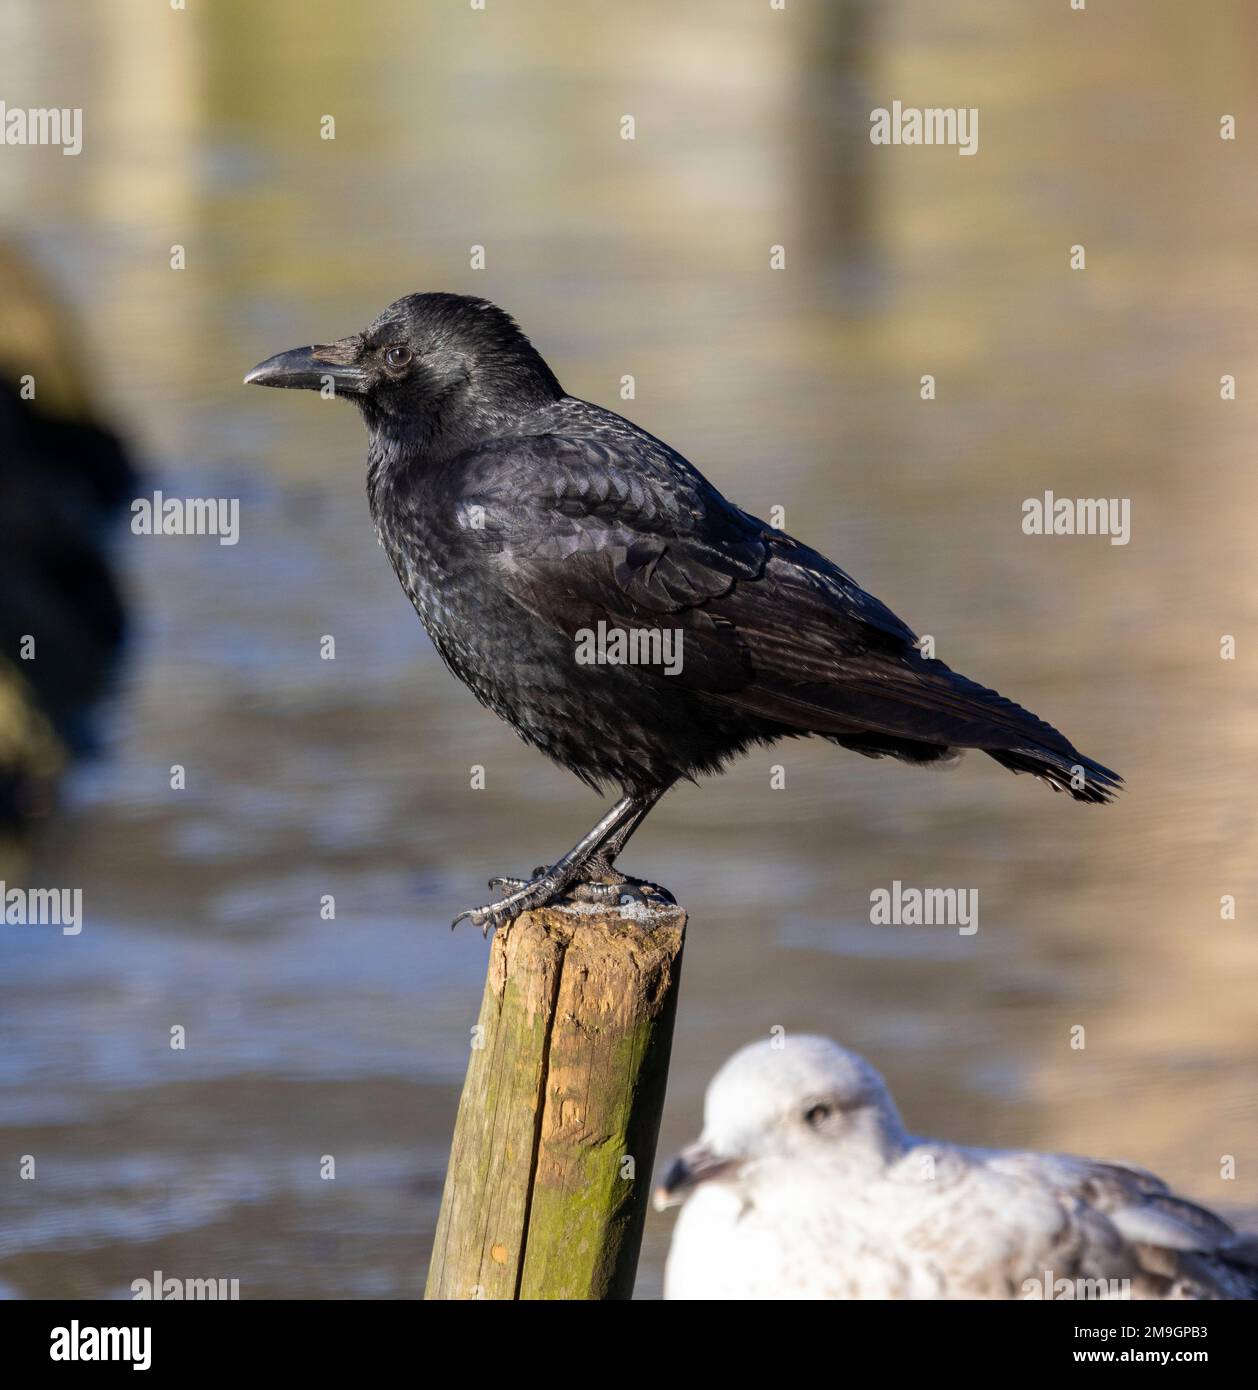 The Carrion Crow is an intelligent bird that has adapted over the ages to live around and exploit humans. They take advantage of all conditions. Stock Photo